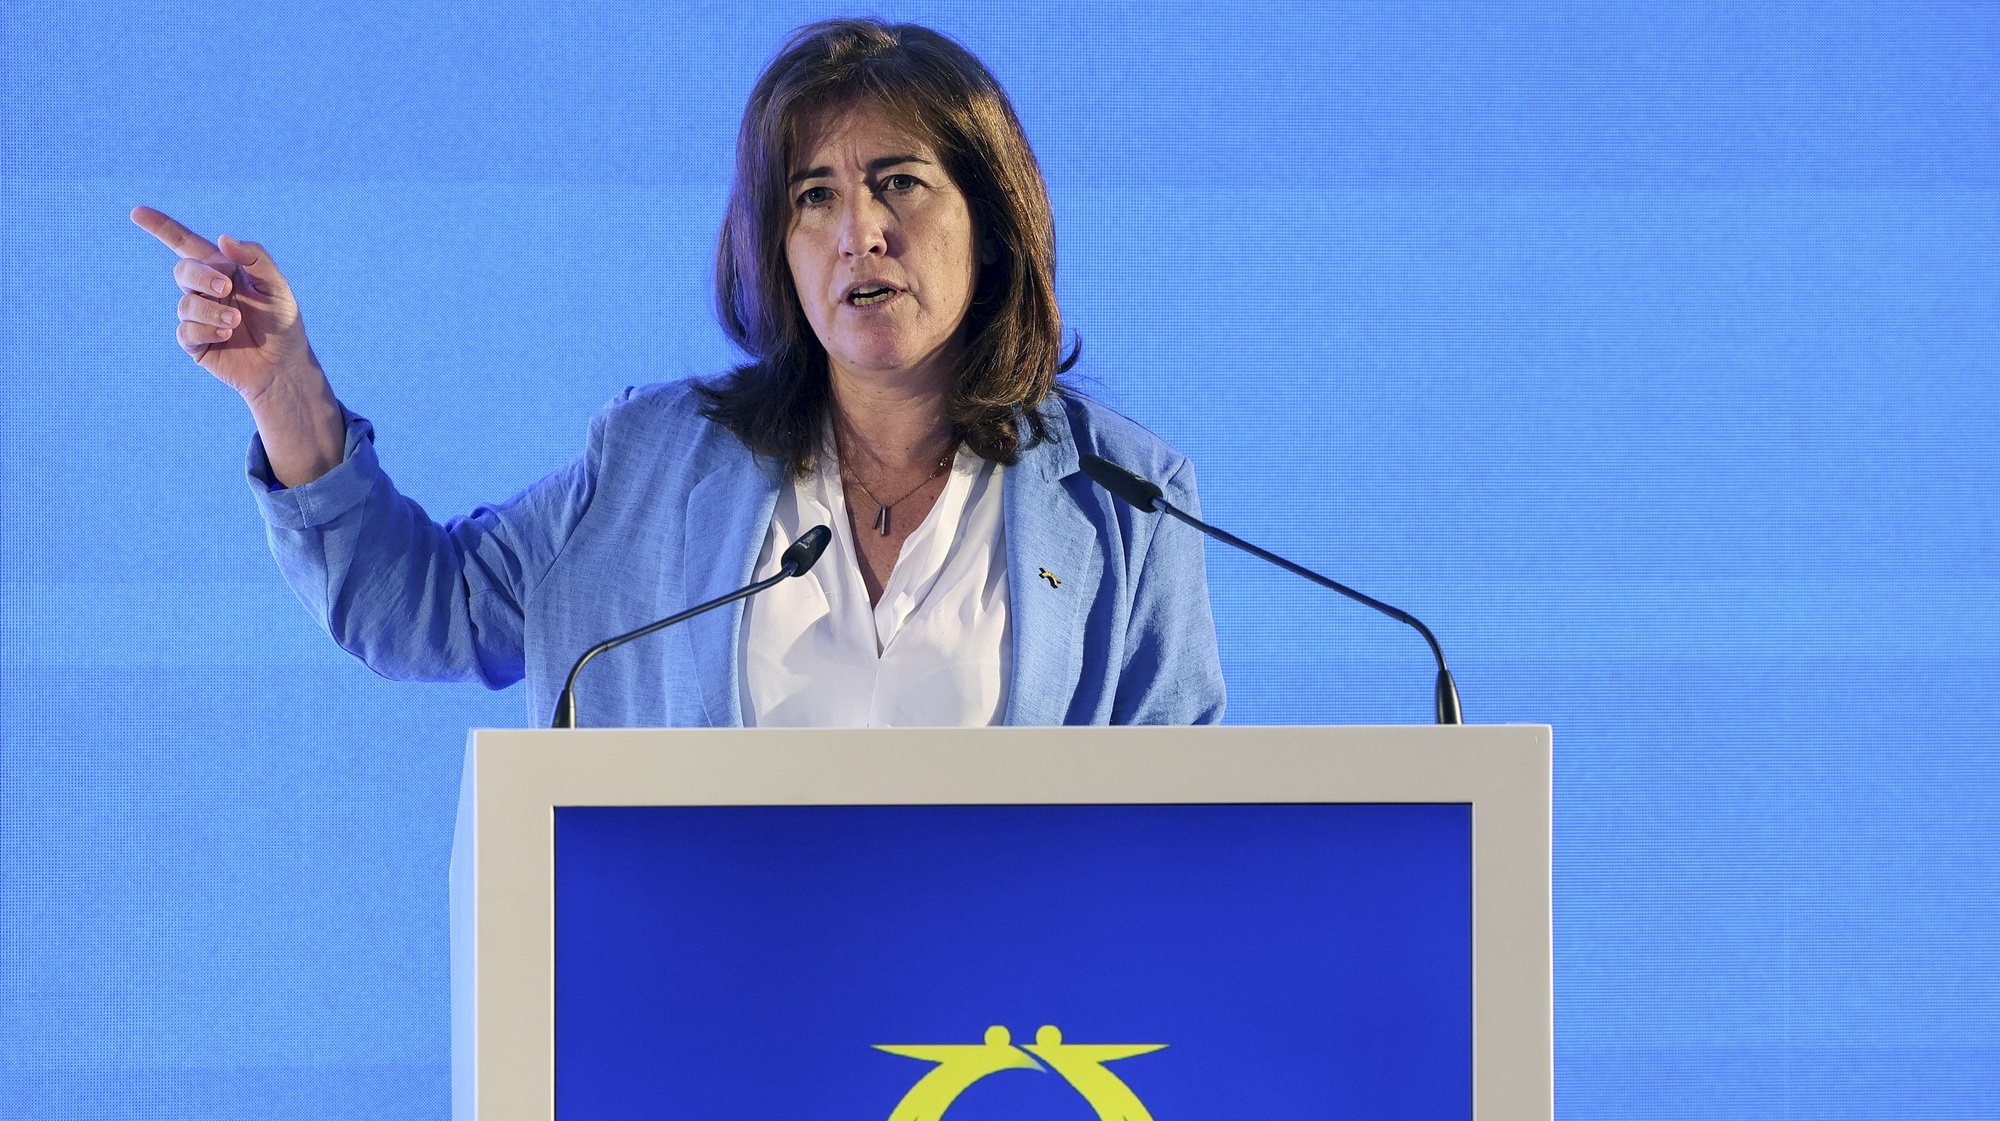 epa10655535 Portuguese Minister of Labour, Solidarity and Social Security Ana Mendes Godinho gestures as she speaks during the Porto Social Forum at the Pavilhao Rosa Mota, in Porto, Portugal, 26 May 2023. The Porto Social Forum, taking place from 26 May to 27 May, aims to reaffirm the role of Social Europe and continue the commitments made at the Porto Social Summit in 2021, involving the Presidency of the EUCouncil, the European Commission, the European Parliament, social partners, and civil society.  EPA/ESTELA SILVA